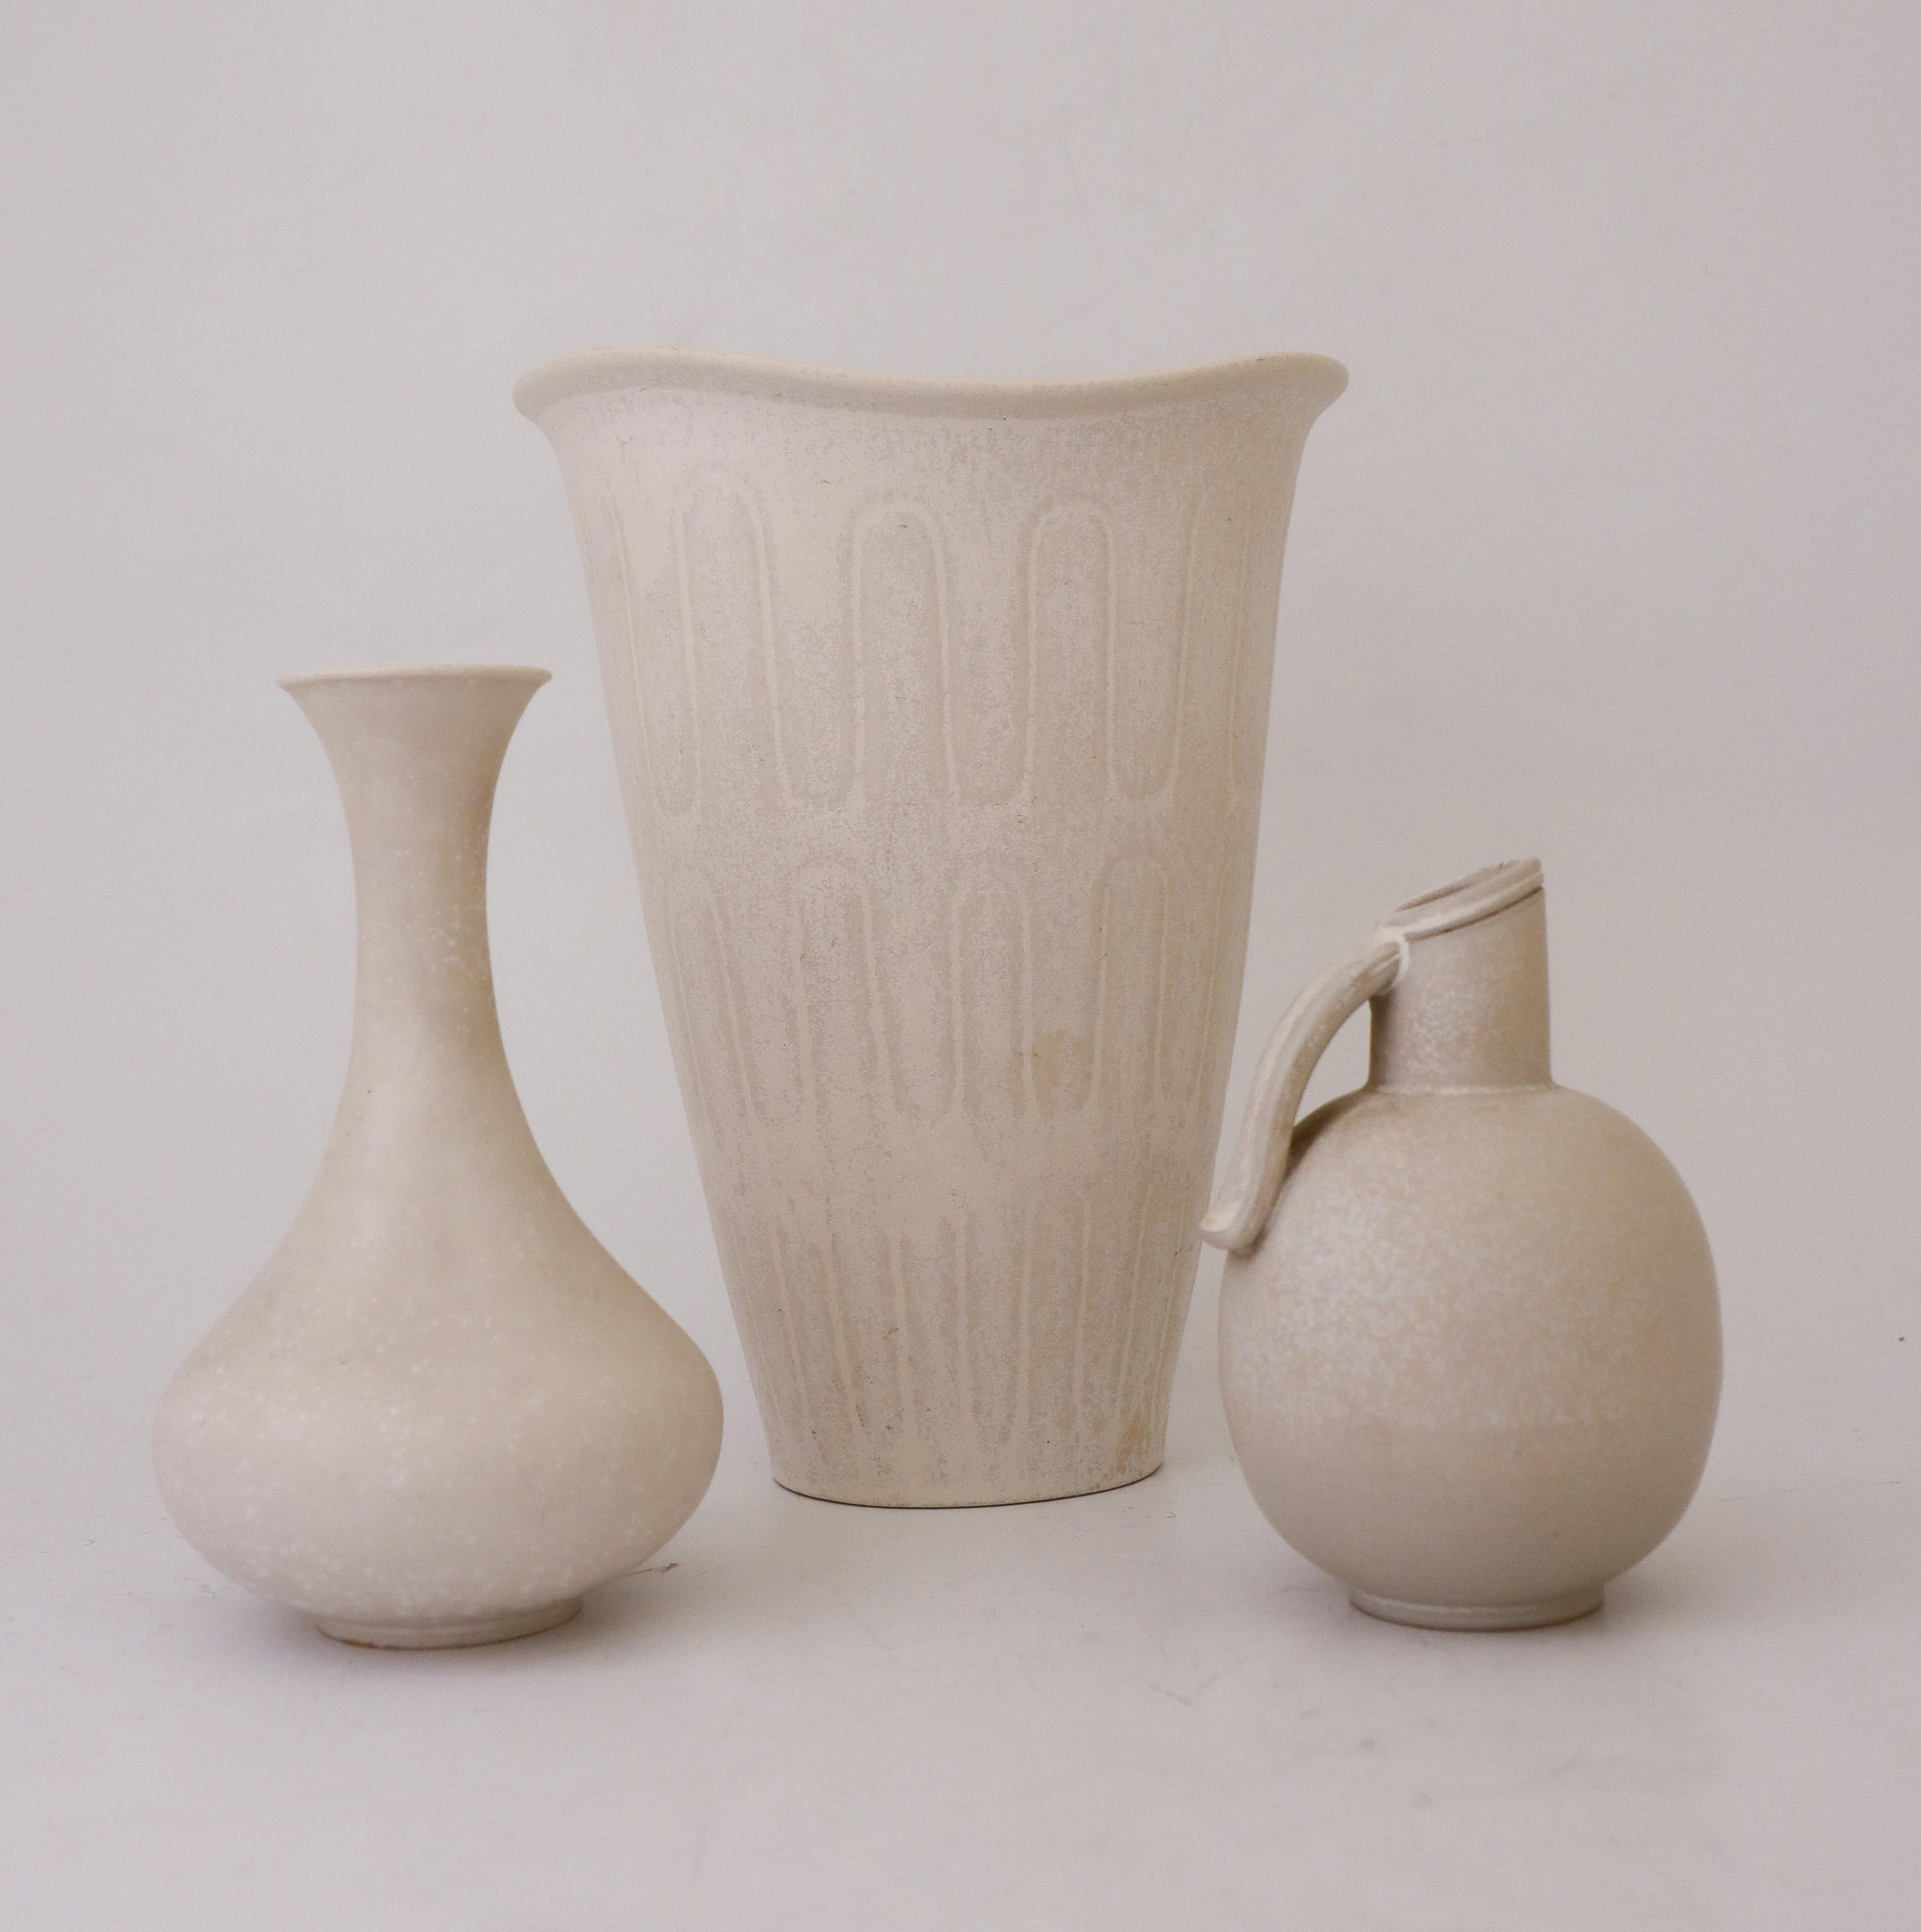 A group of three pieces of white ceramic vases designed by Gunnar Nylund at Rörstrand, the pieces are 23, 16.5 and 12.5 cm high. All pieces are first quality. They are in very good condition except from some minor marks. 

Gunnar Nylund was born